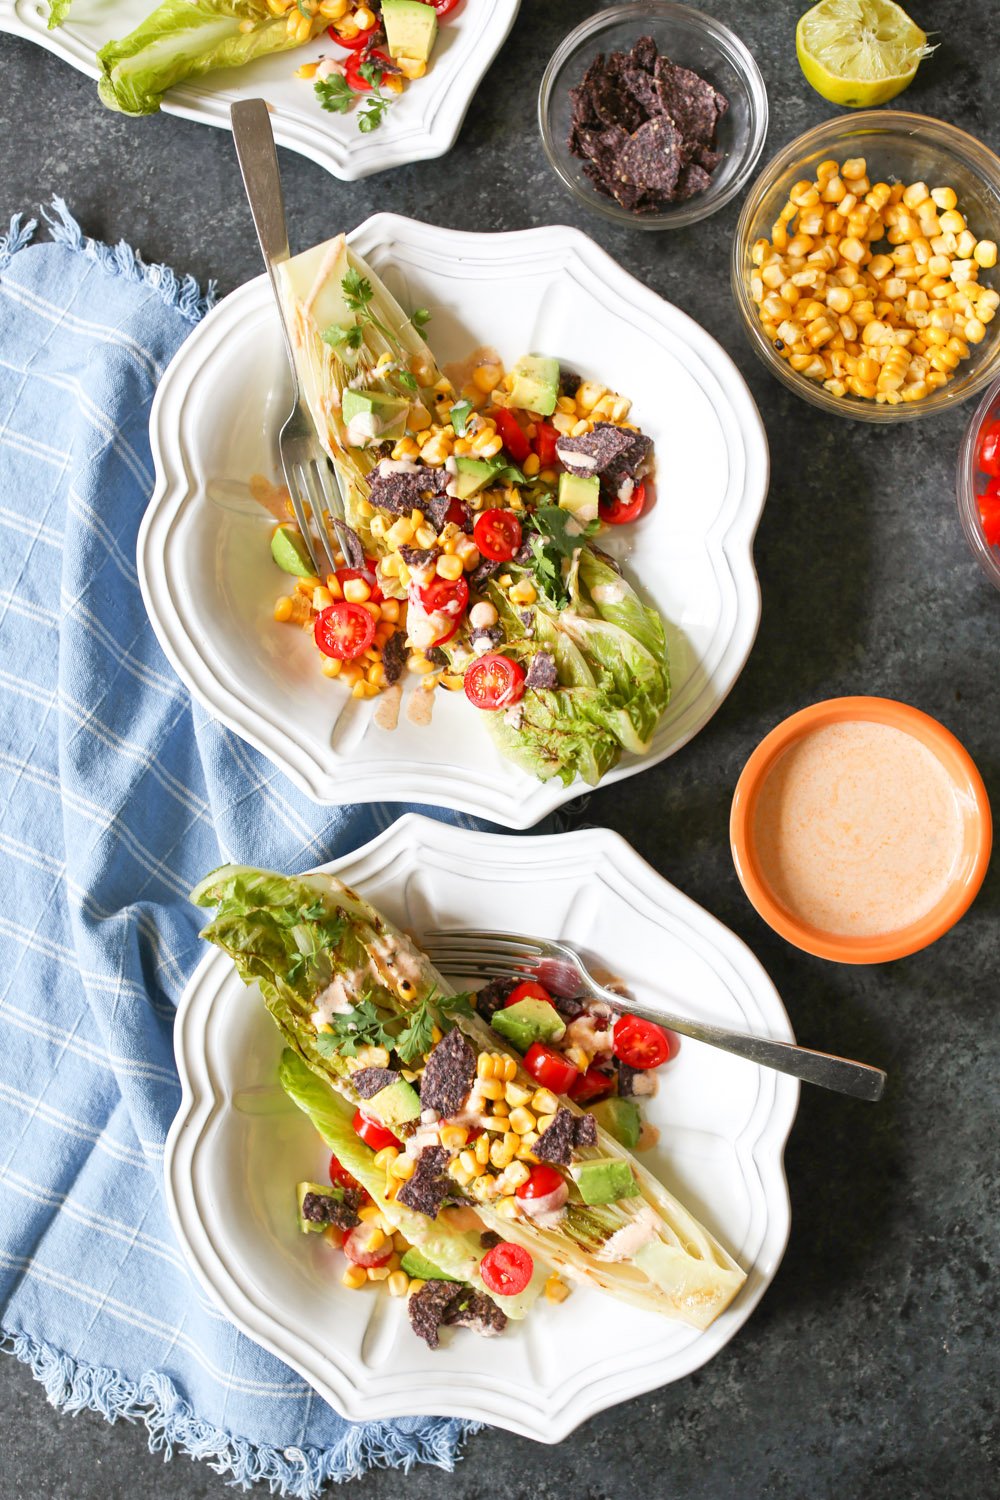 Fiesta Summer Salad with Grilled Romaine